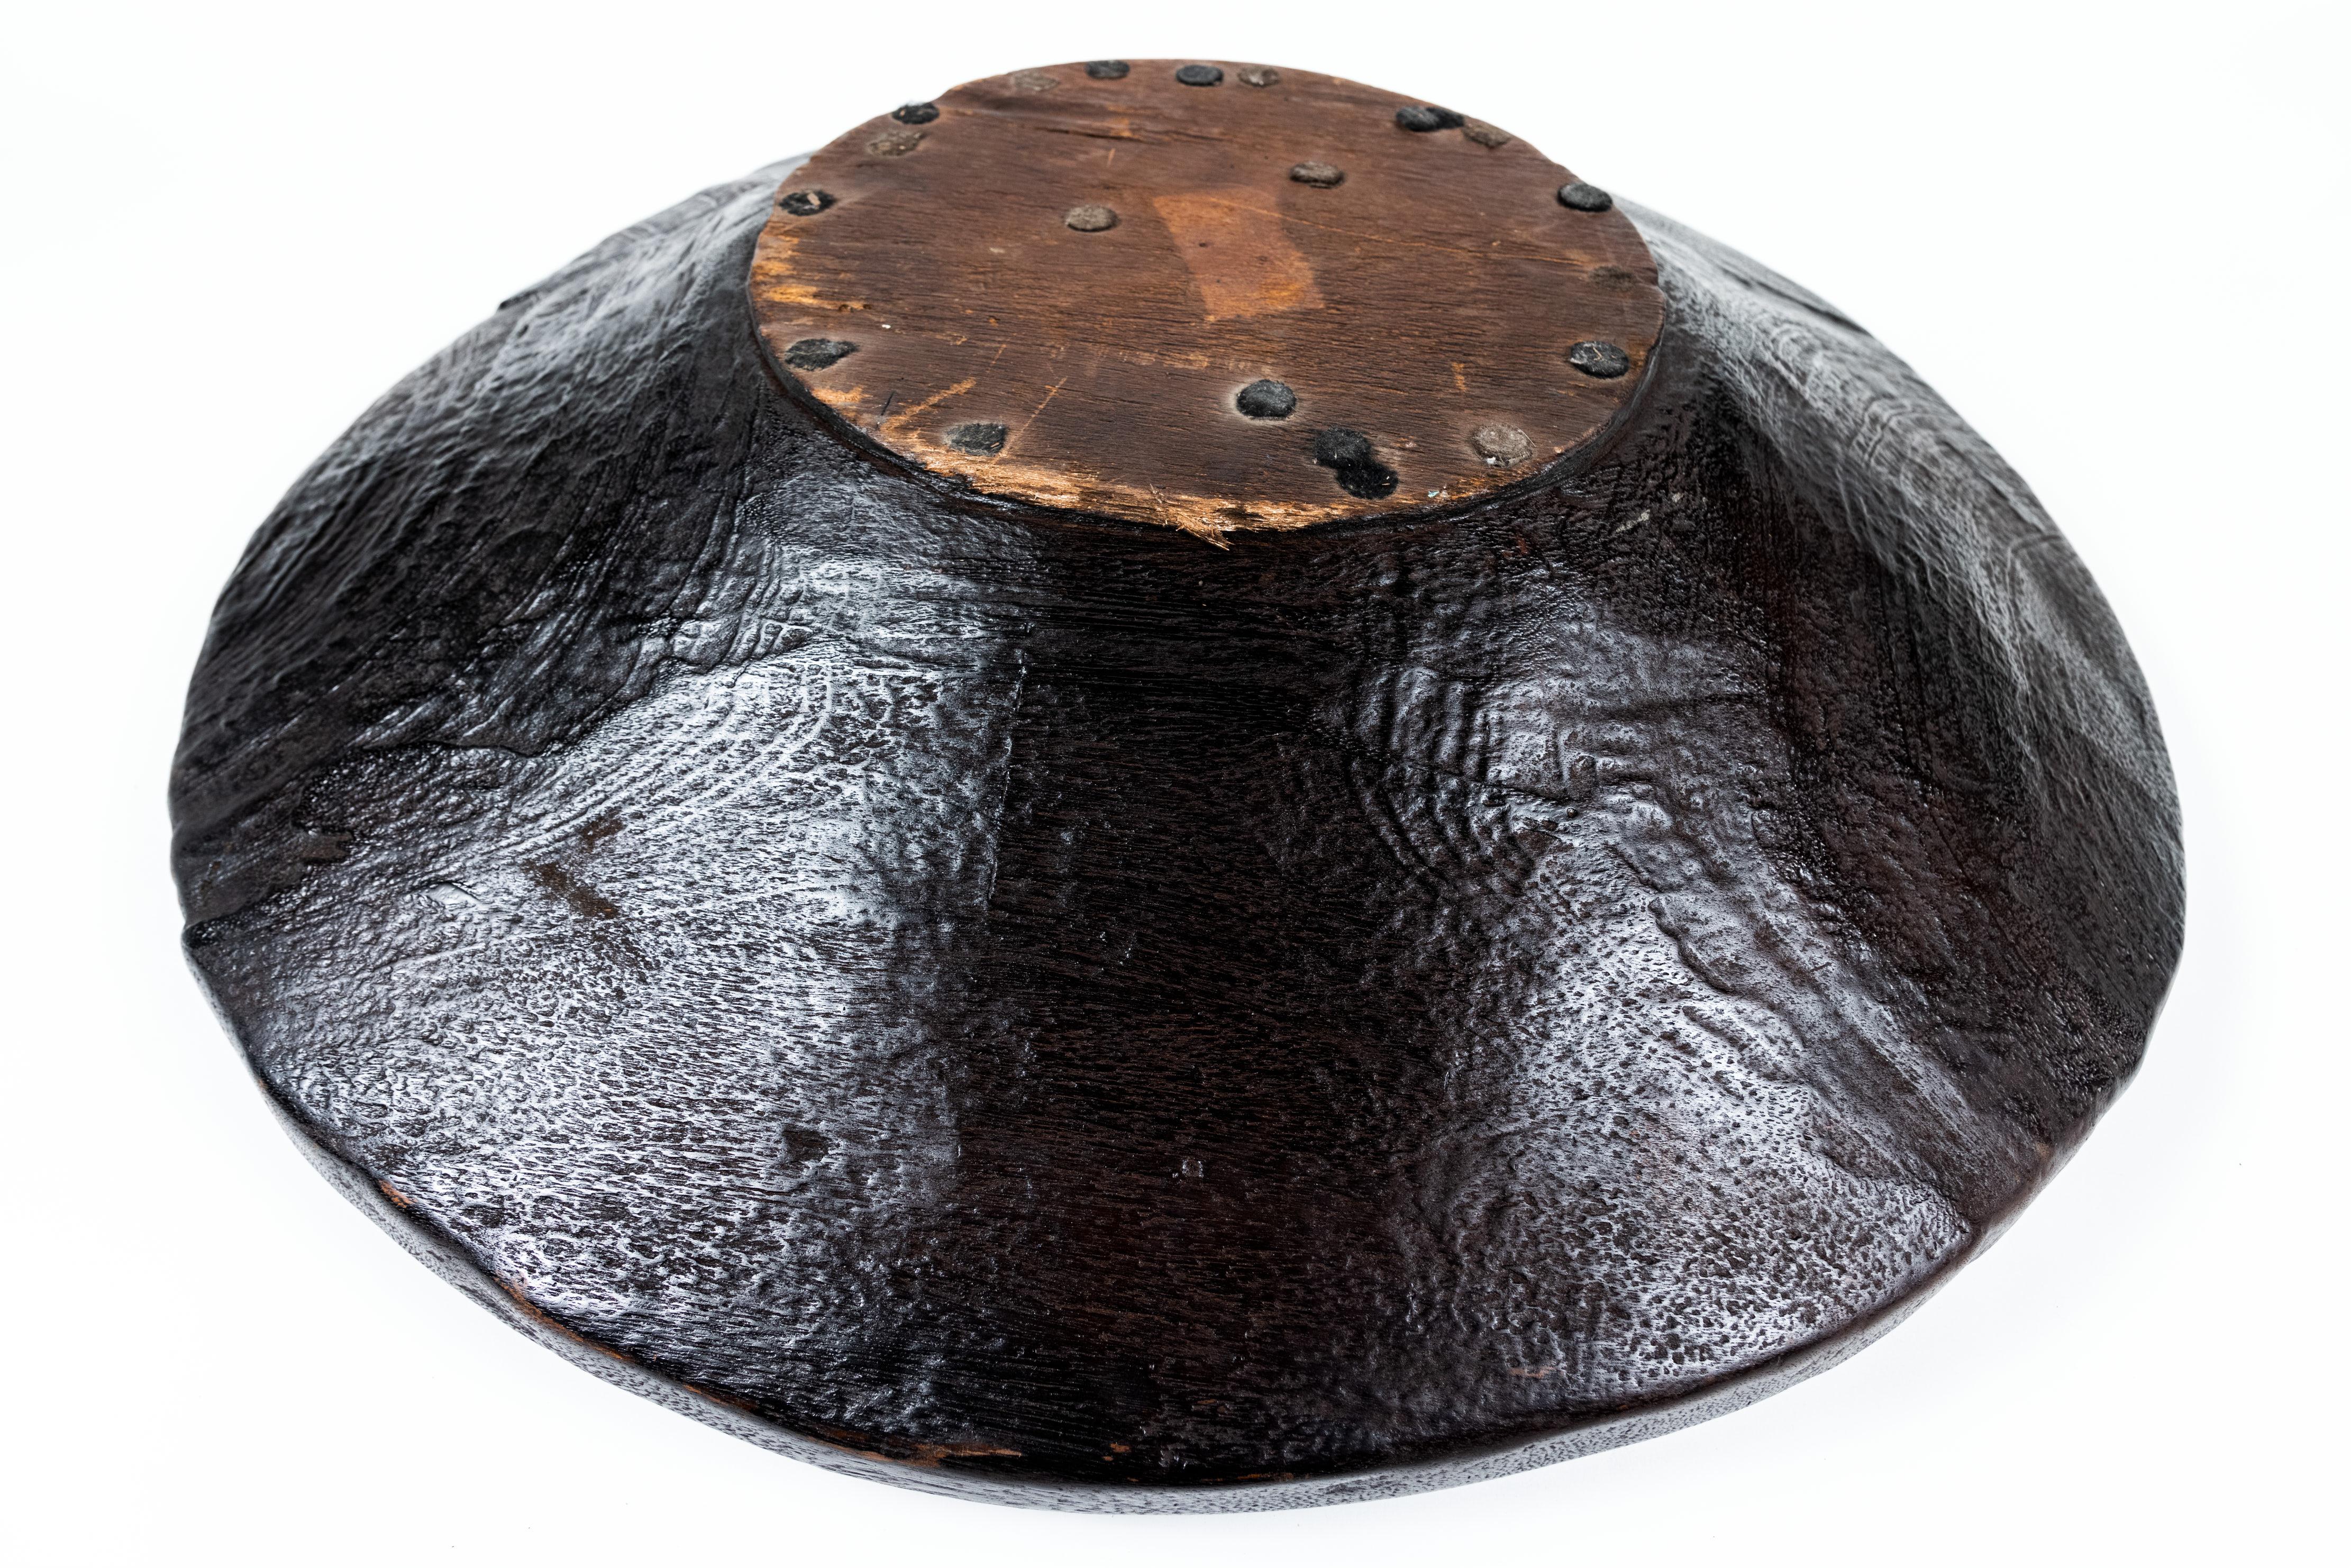 20th Century Jackfruit Wood Bowl from Sumatra In Good Condition For Sale In Pasadena, CA